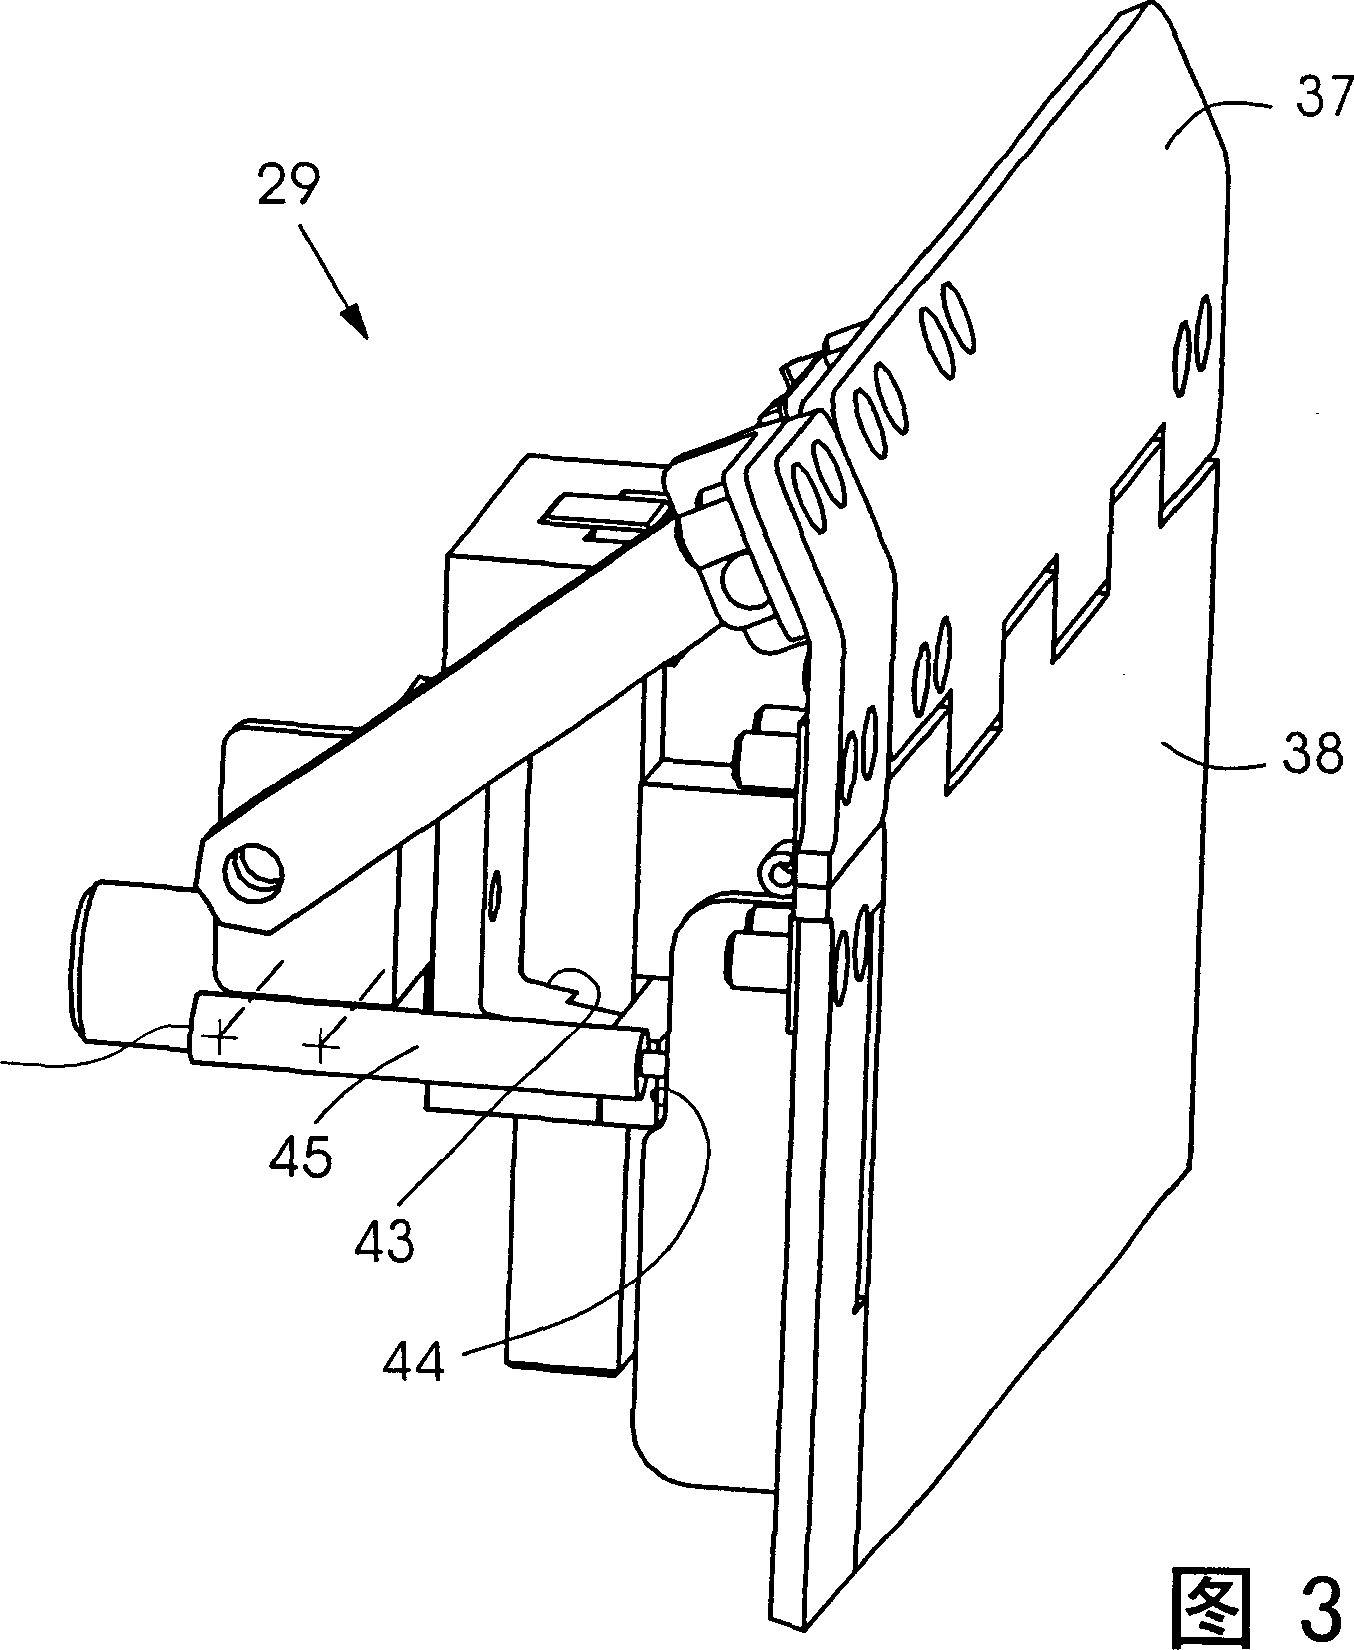 Device for forming single-sheet paper stack